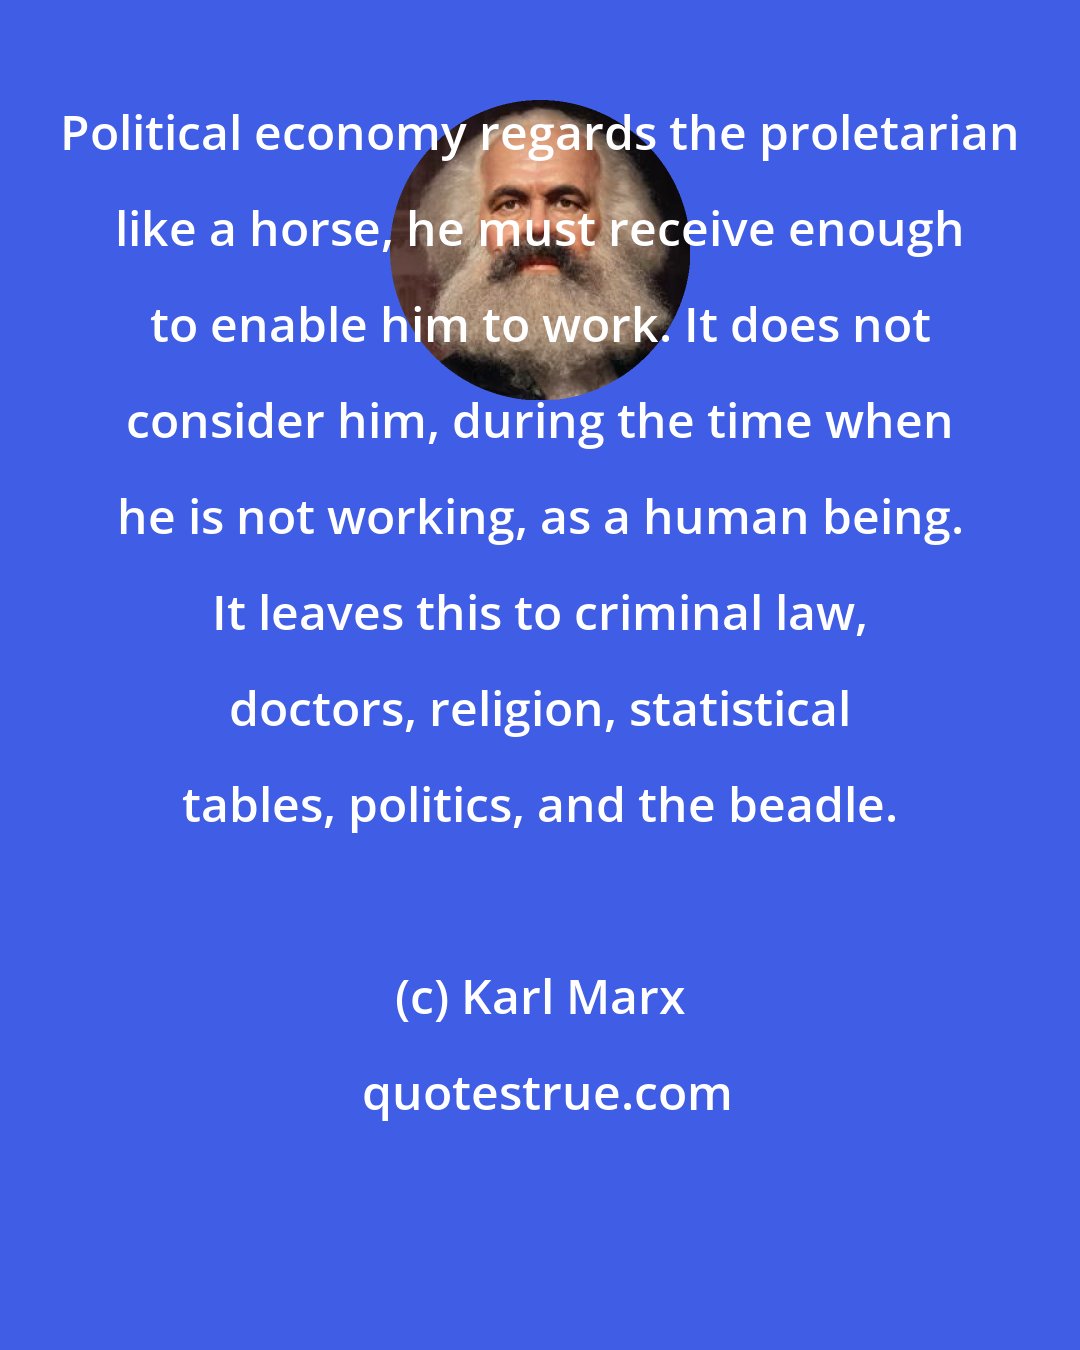 Karl Marx: Political economy regards the proletarian like a horse, he must receive enough to enable him to work. It does not consider him, during the time when he is not working, as a human being. It leaves this to criminal law, doctors, religion, statistical tables, politics, and the beadle.